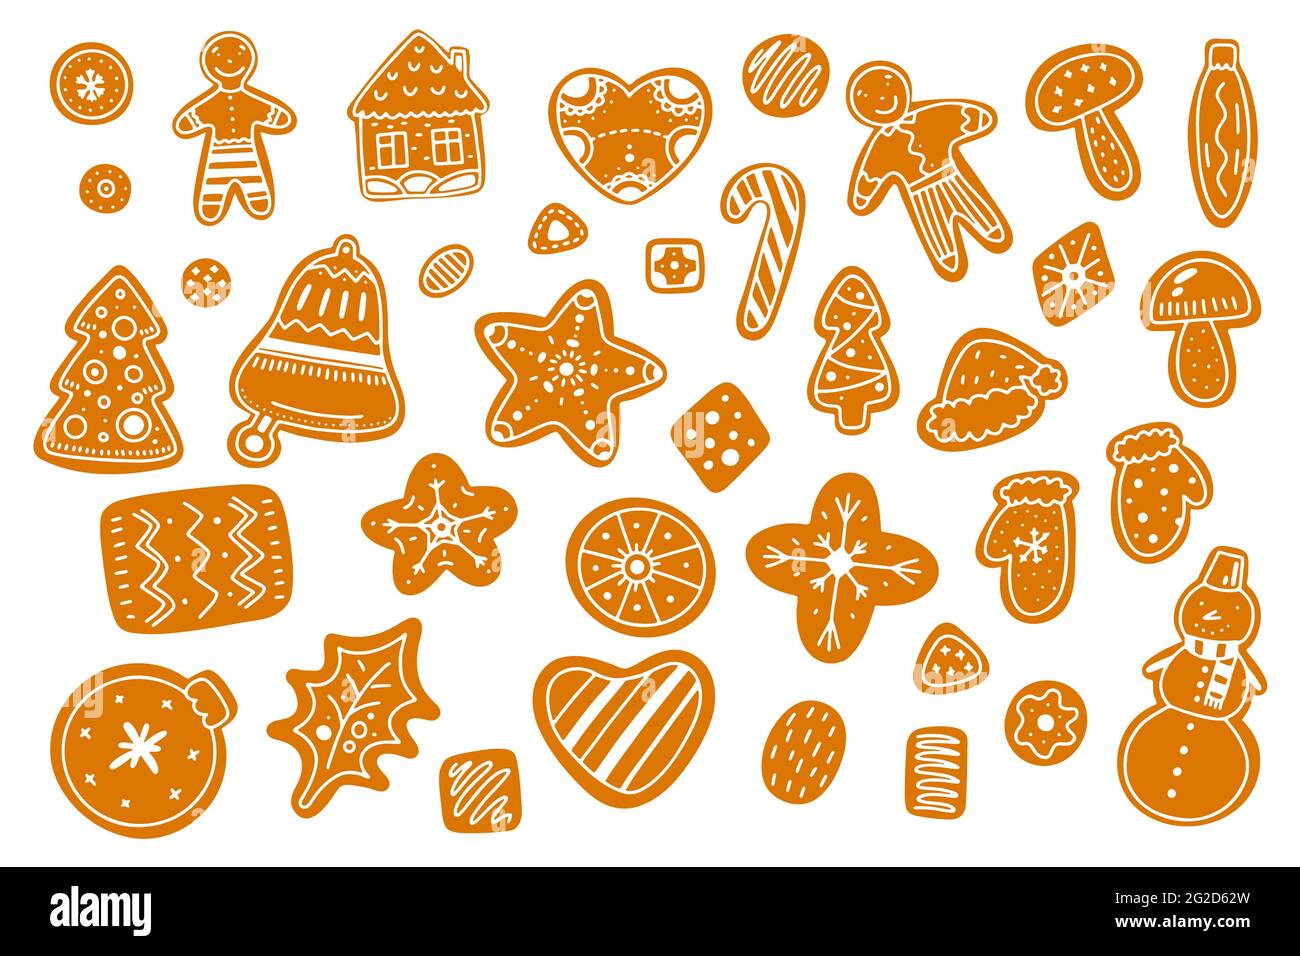 Cartoon Christmas gingerbread cookie. Hand drawn pastries isolated on white background. Baked Christmas tree, star, snowflake, man, house. Homemade ho Stock Vector